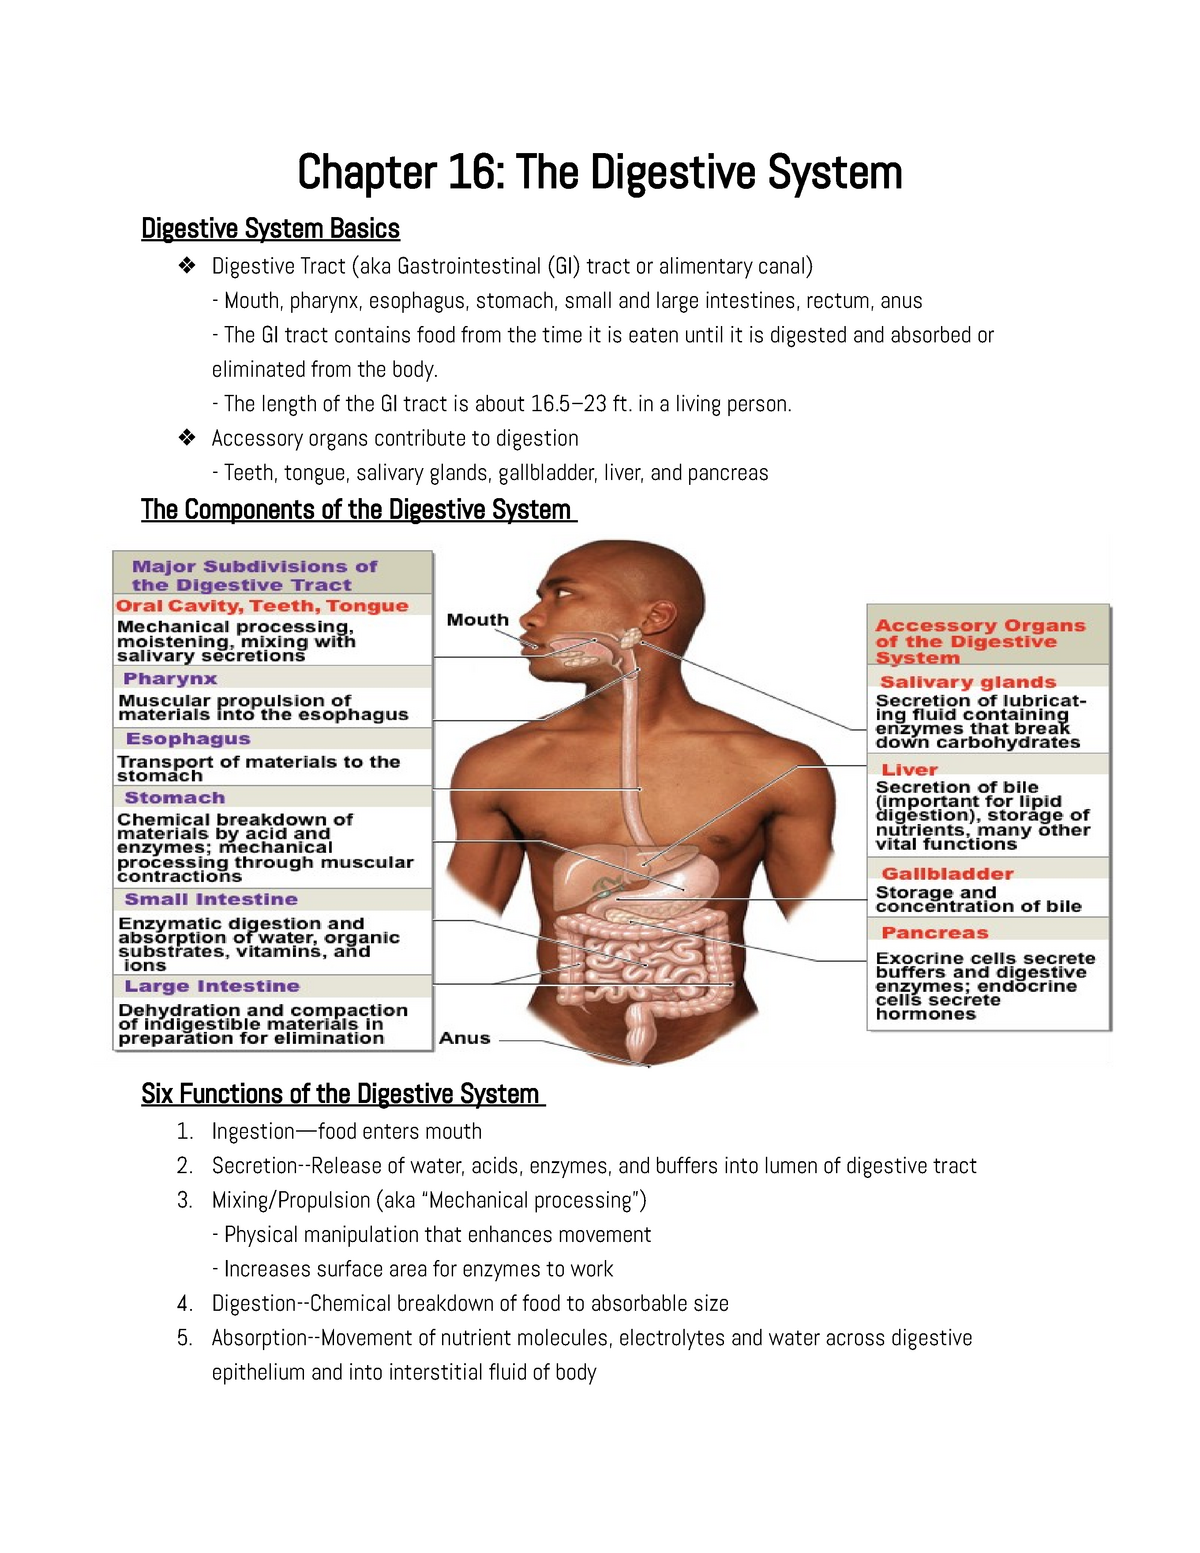 Chapter 16 The Digestive System Chapter 16 The Digestive System